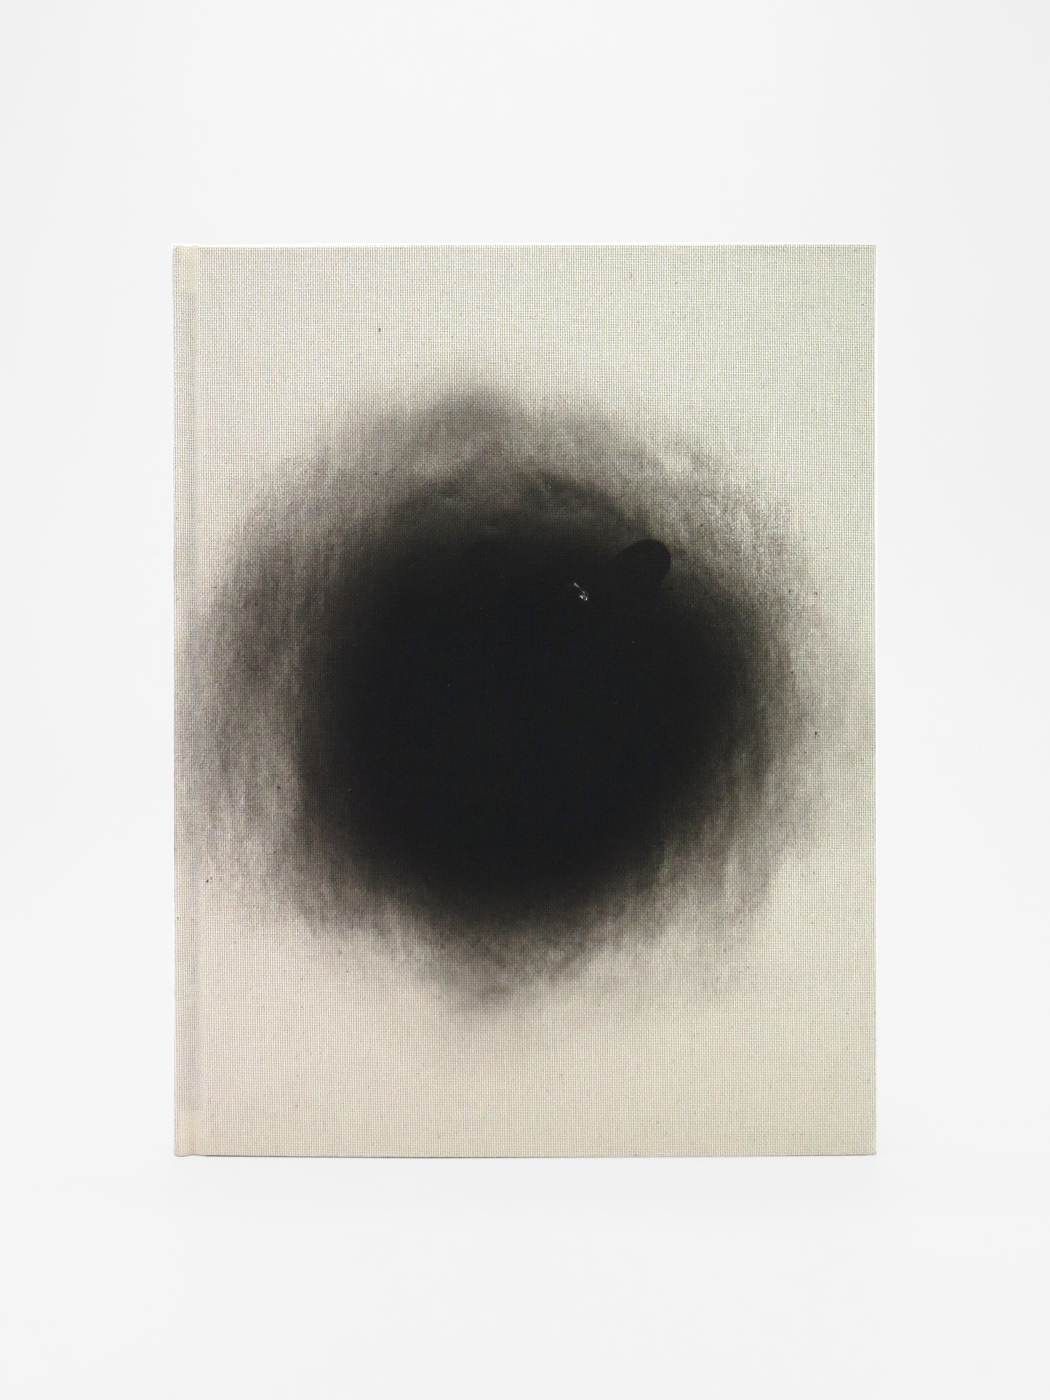 Kenneth Noland, Steven Parrino, Homage to the Circle